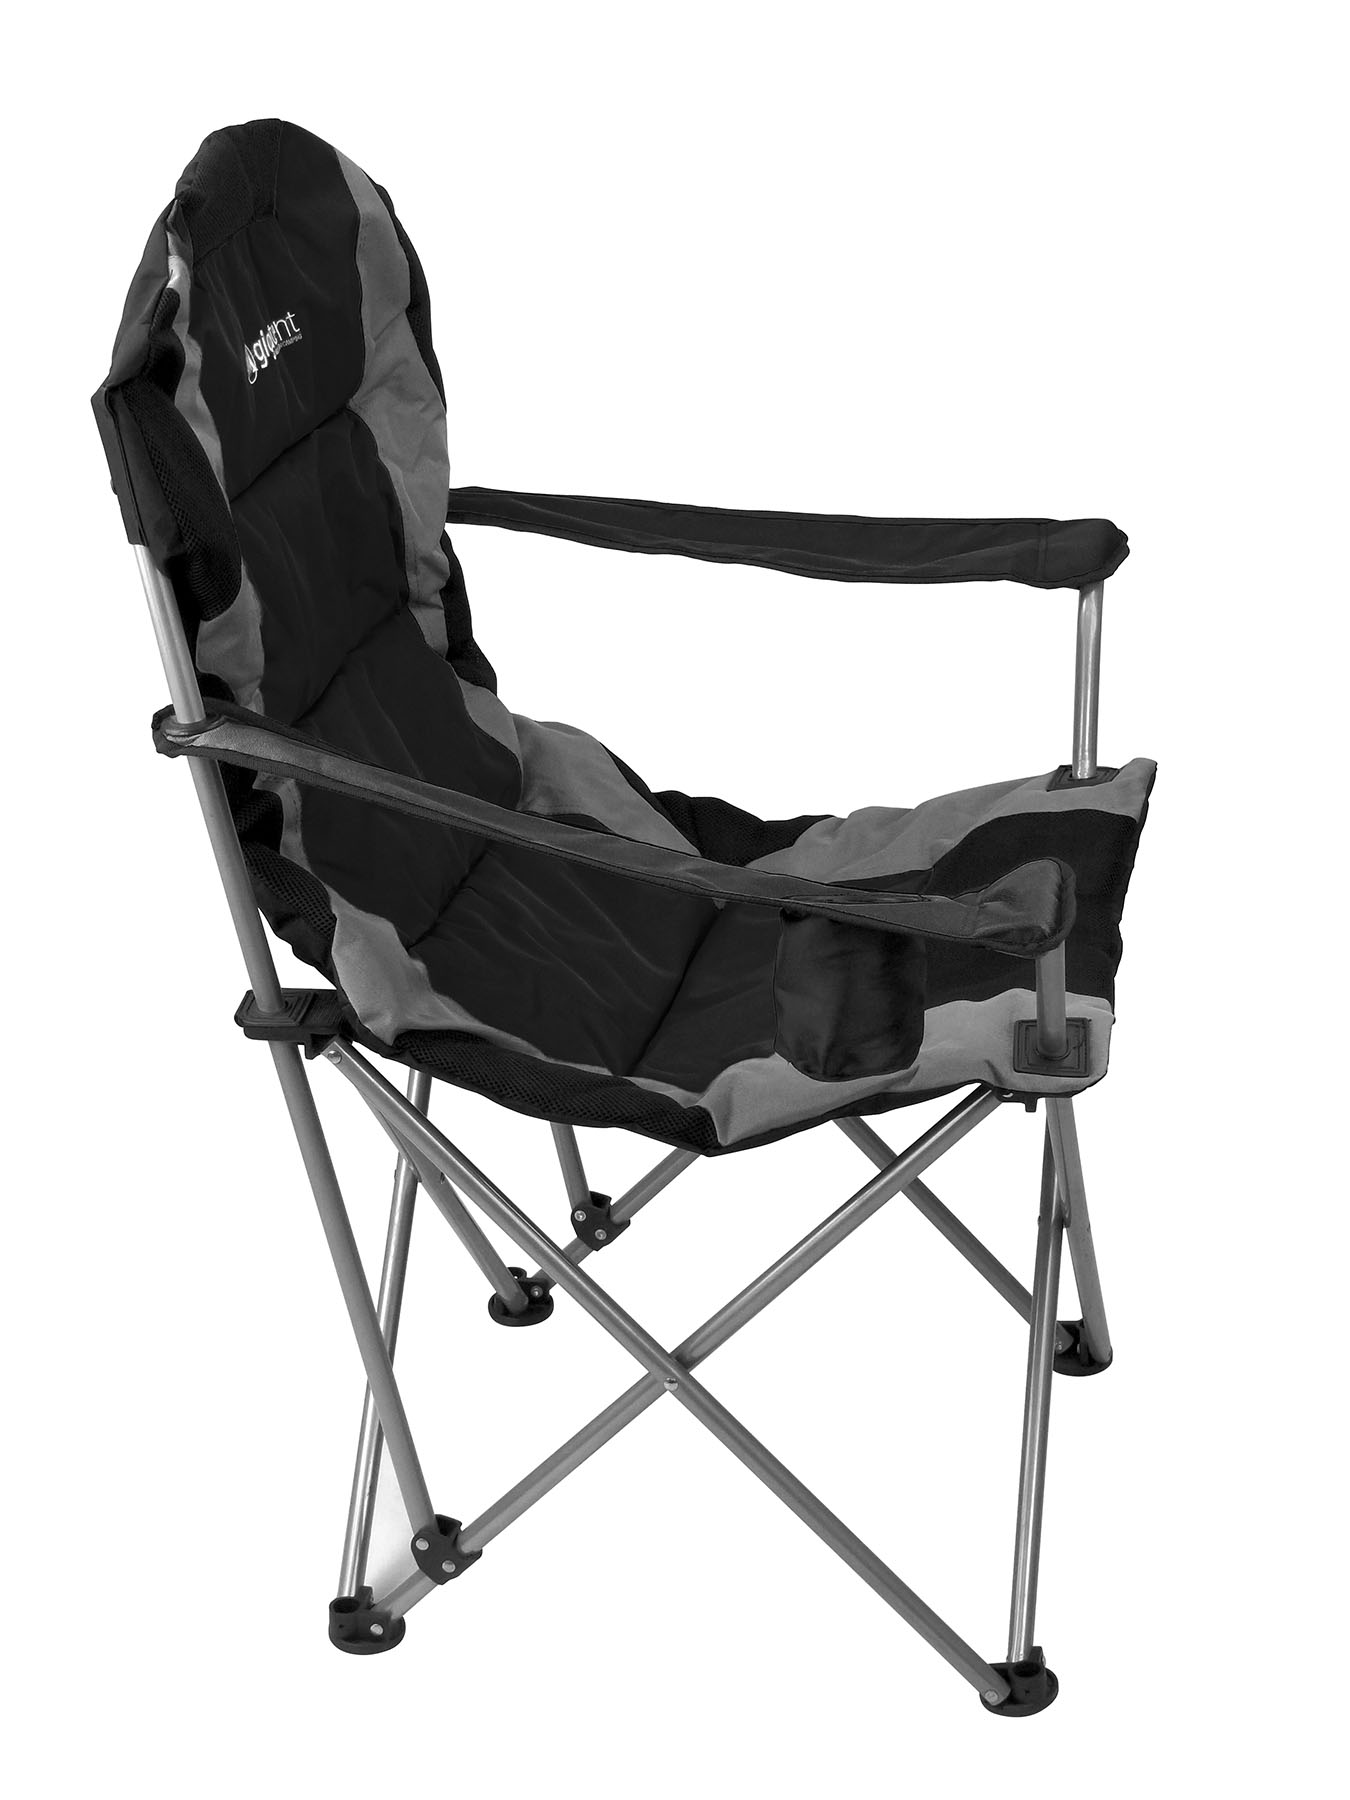 GigaTent Outdoor Camping Chair - Lightweight, Portable Design (Black) - image 5 of 8